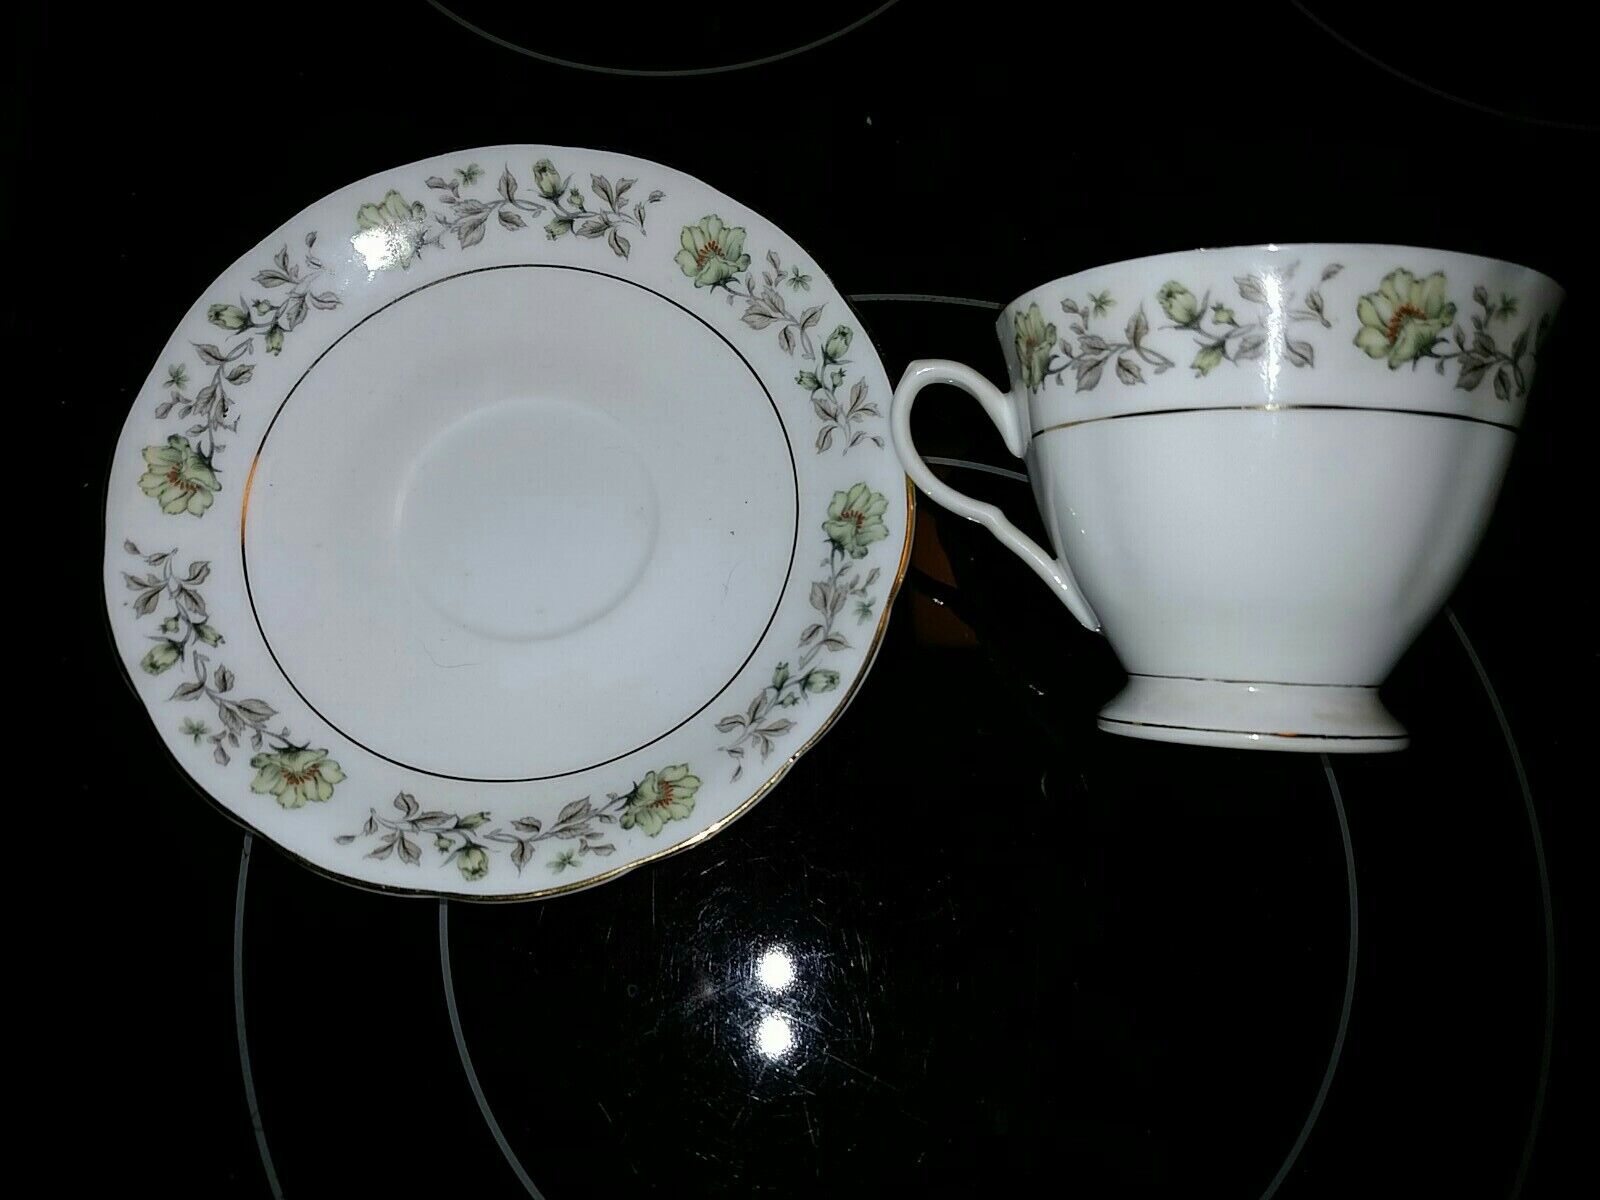 VINTAGE TEA CUP & SAUCER SET WHITE WITH GREENS & GOLD TRIM MADE IN CHINA W/ MARK